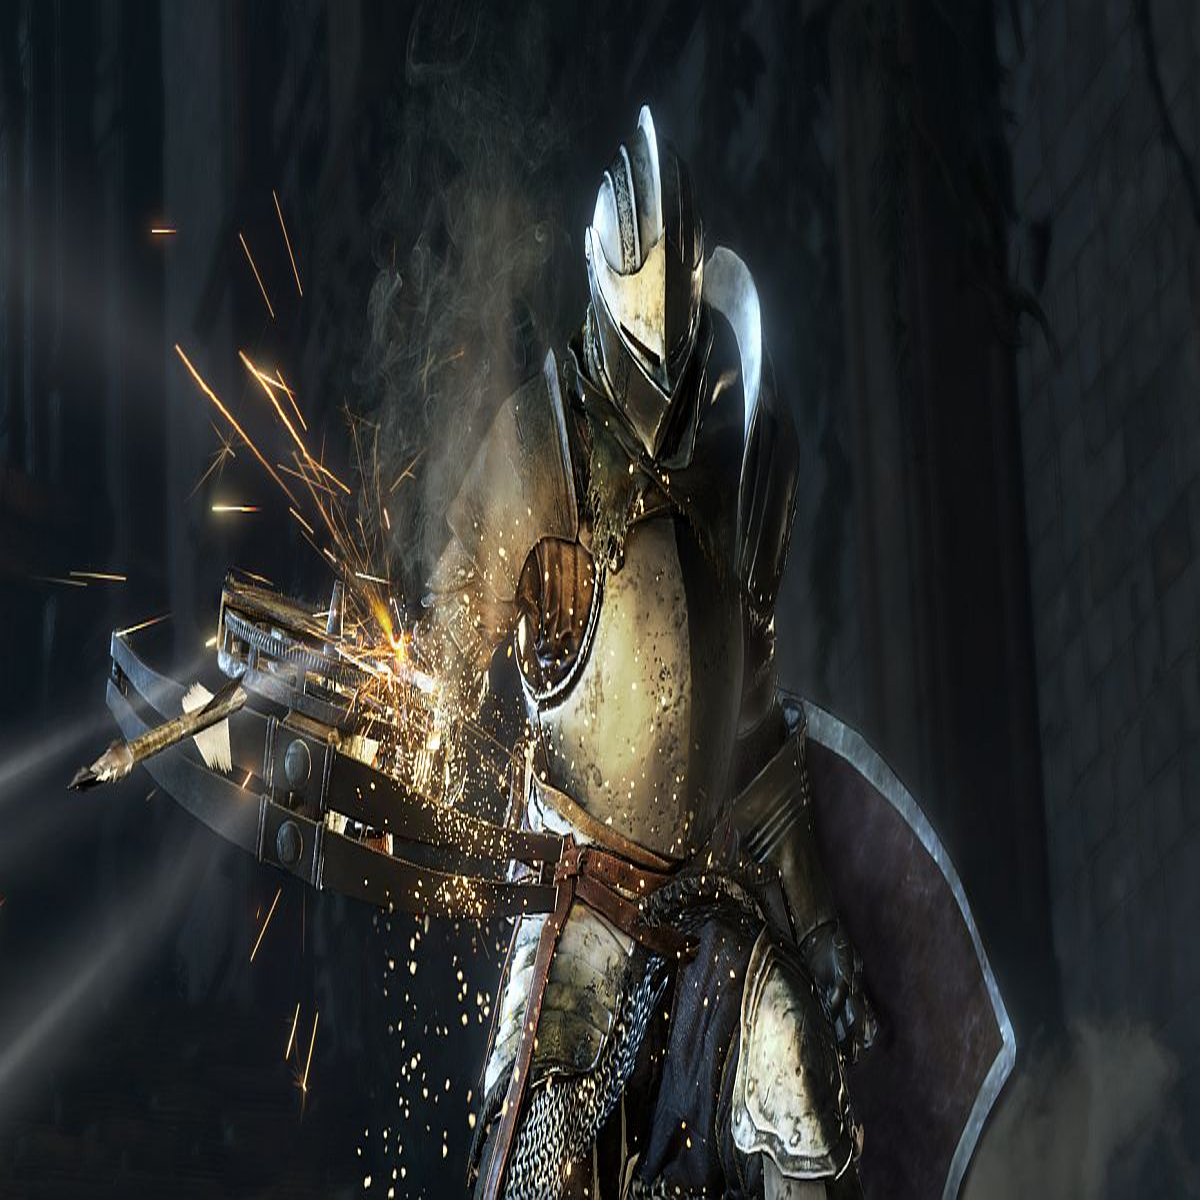 https://assetsio.gnwcdn.com/dark_souls_3_the_ringed_city_dlc_header.jpg?width=1200&height=1200&fit=crop&quality=100&format=png&enable=upscale&auto=webp